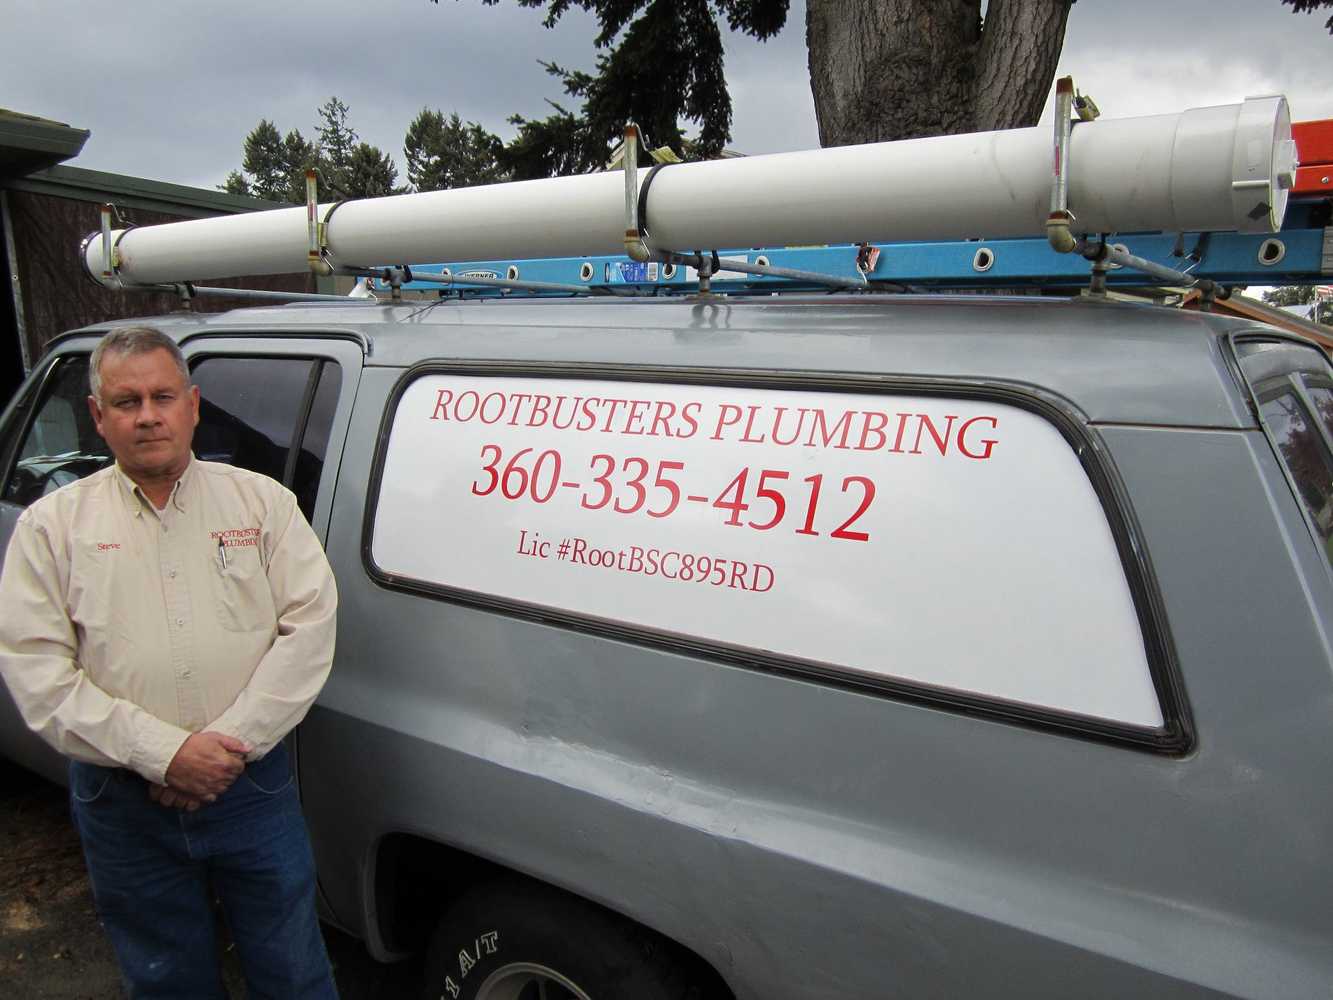 Projects by Root Busters Plumbing and Drain Cleaning